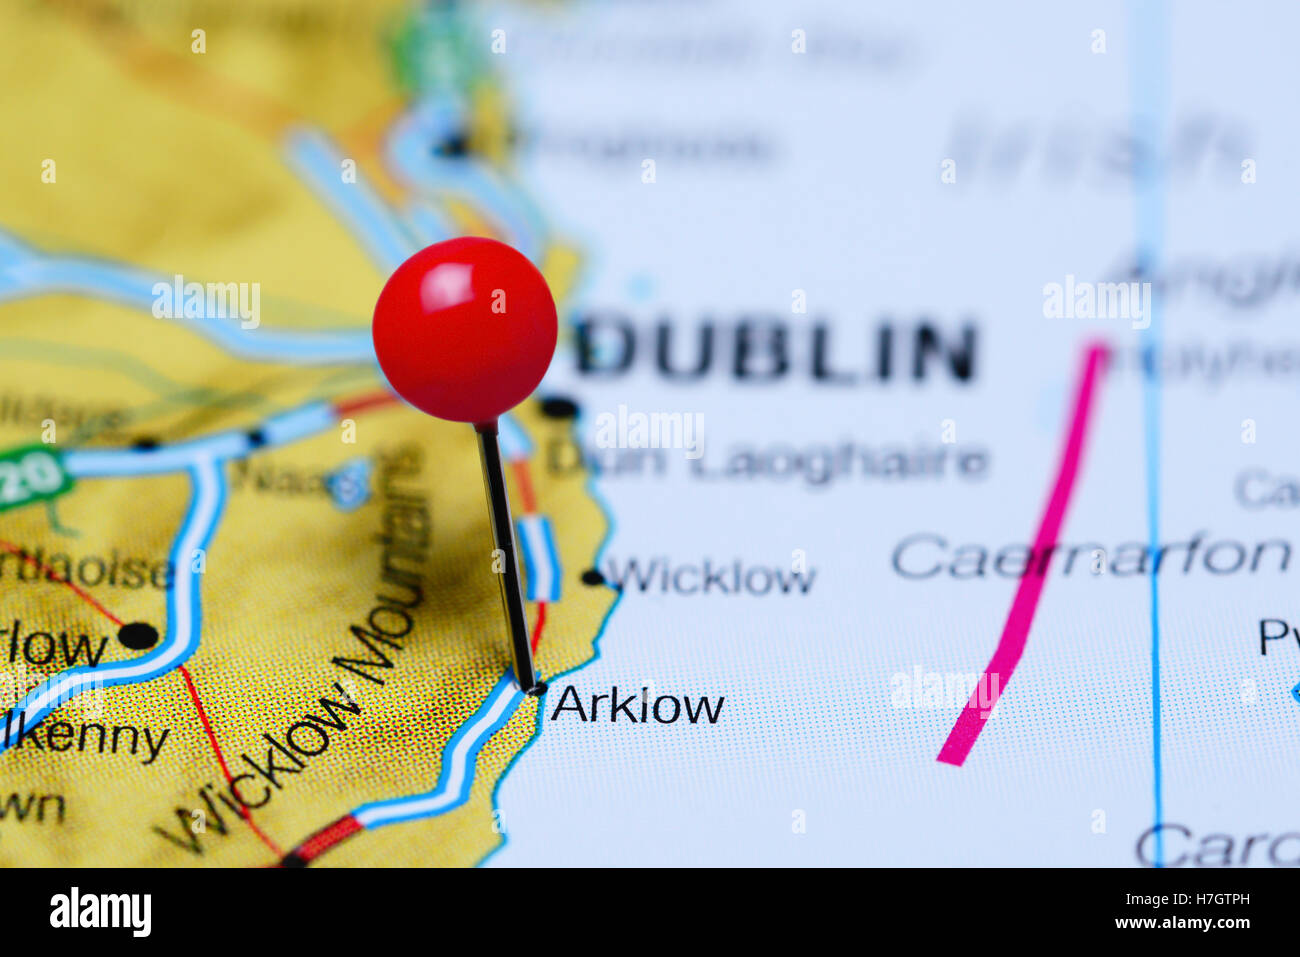 Arklow pinned on a map of Ireland Stock Photo